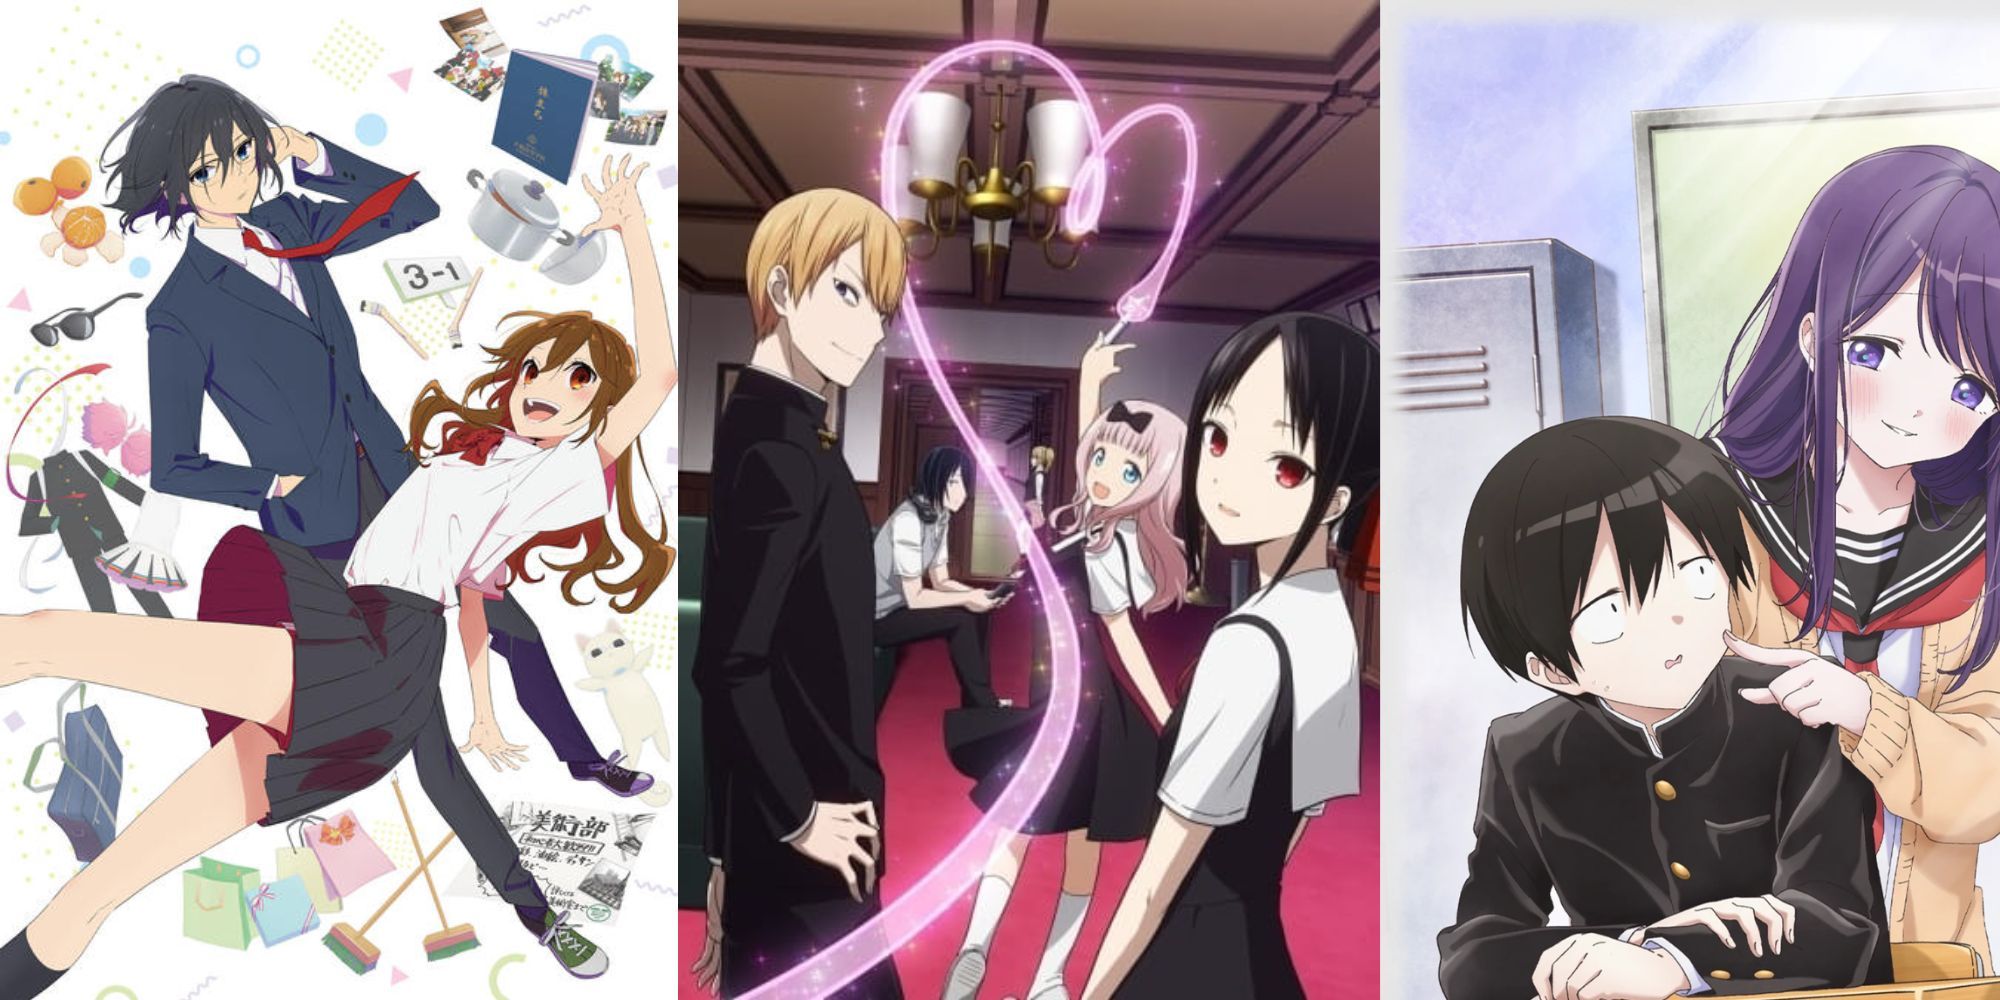 How KaguyaSama Differs From Most High School Romance Anime